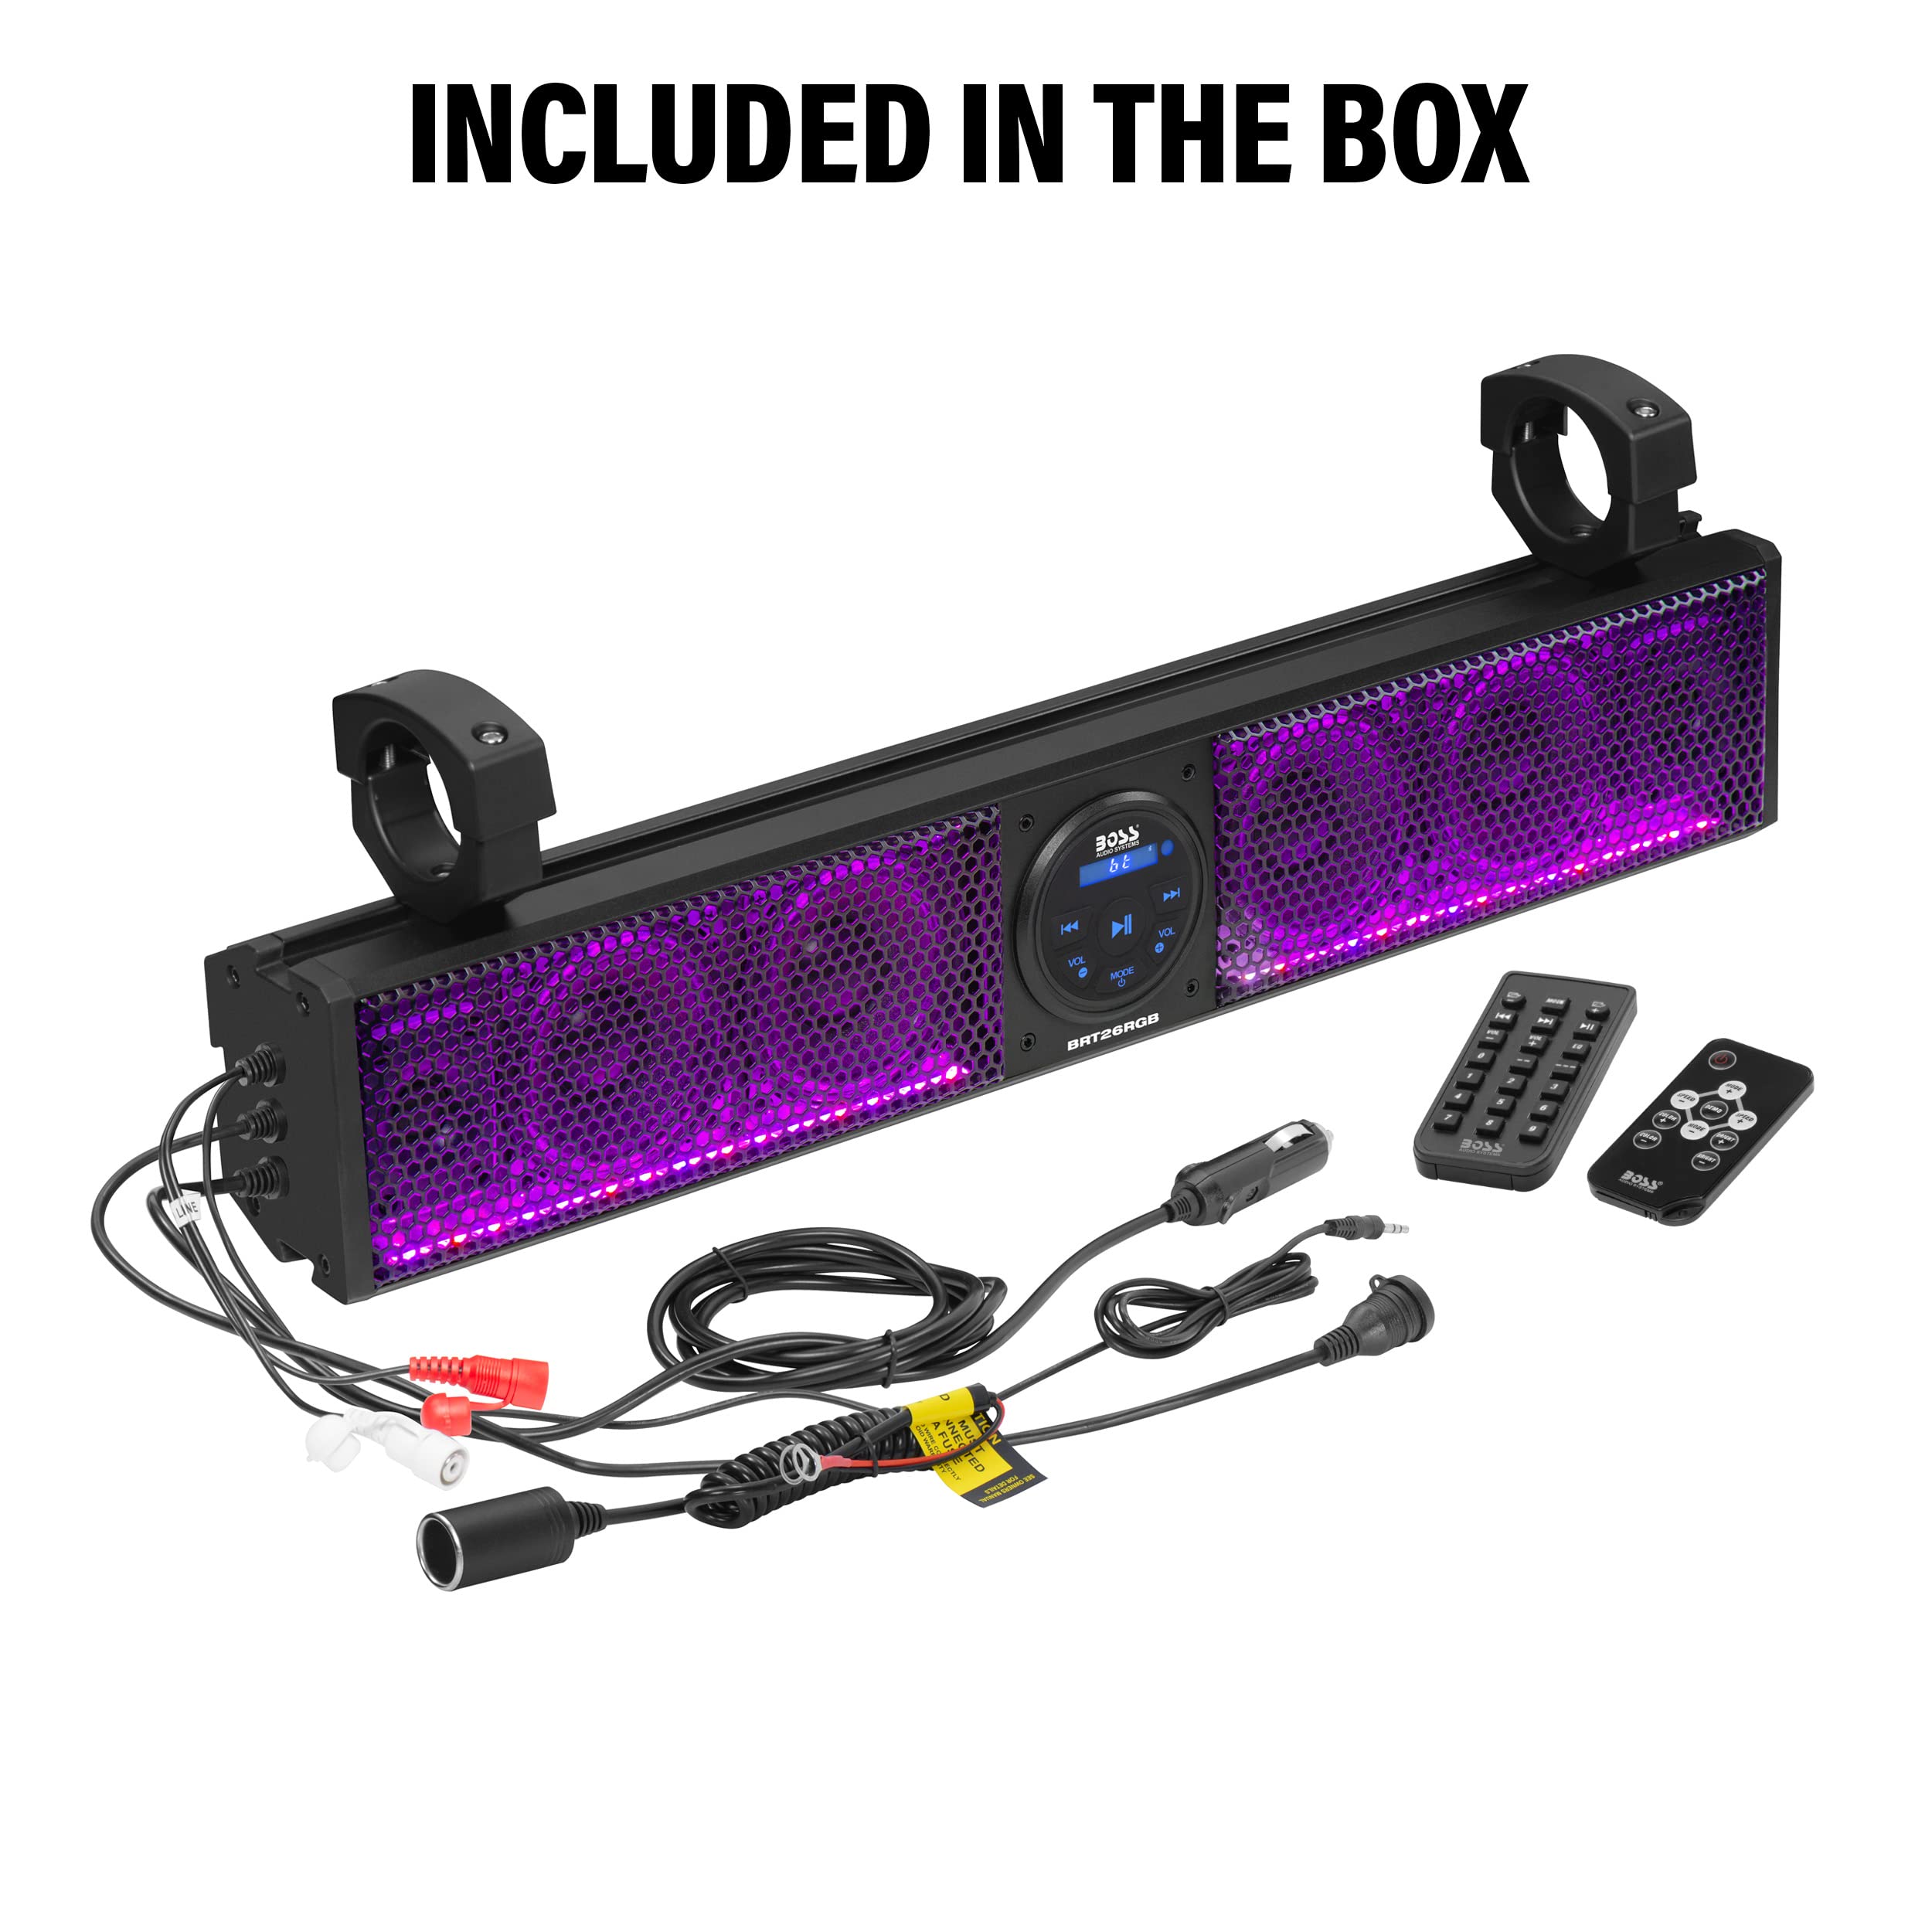 BOSS Audio Systems BRT26RGB ATV UTV Sound Bar System - 26 Inches Wide, IPX5 Rated Weatherproof, Bluetooth Audio, Amplified, 4 inch Speakers, 1 Inch Tweeters, USB Port, RGB Multicolor Illumination